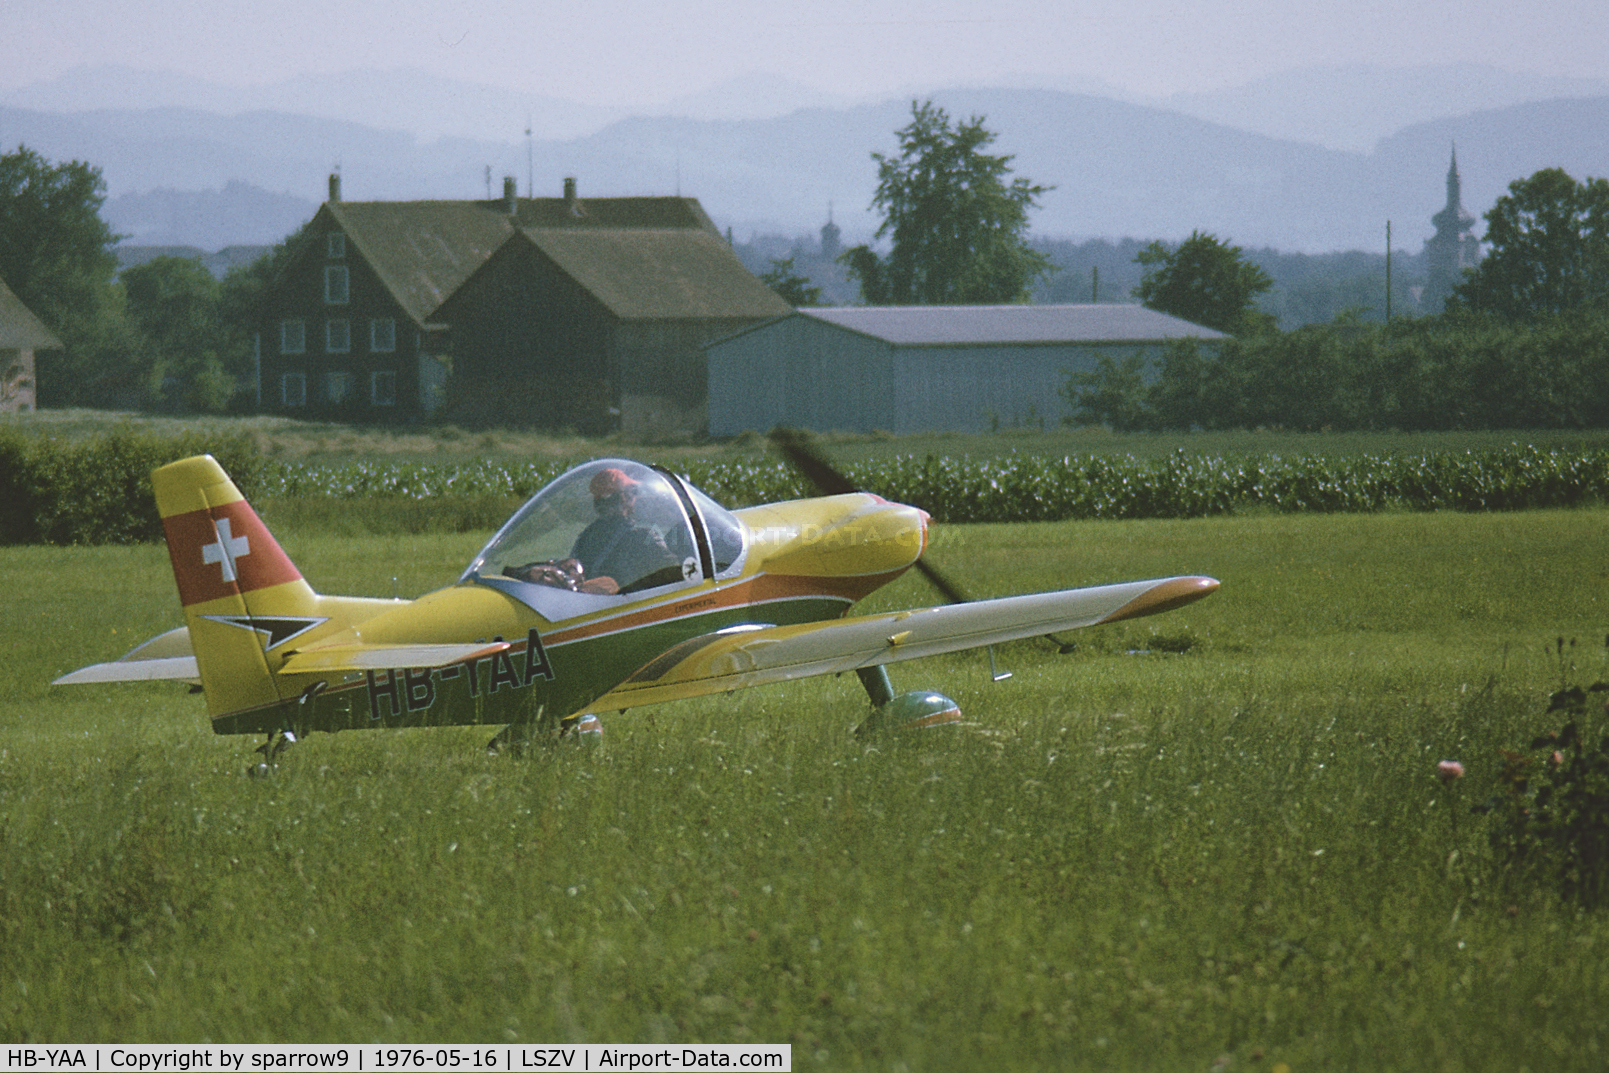 HB-YAA, 1975 Pagasus SW-01 C/N SW-01, At Sitterdorf airfield. Scanned from a color-negative.